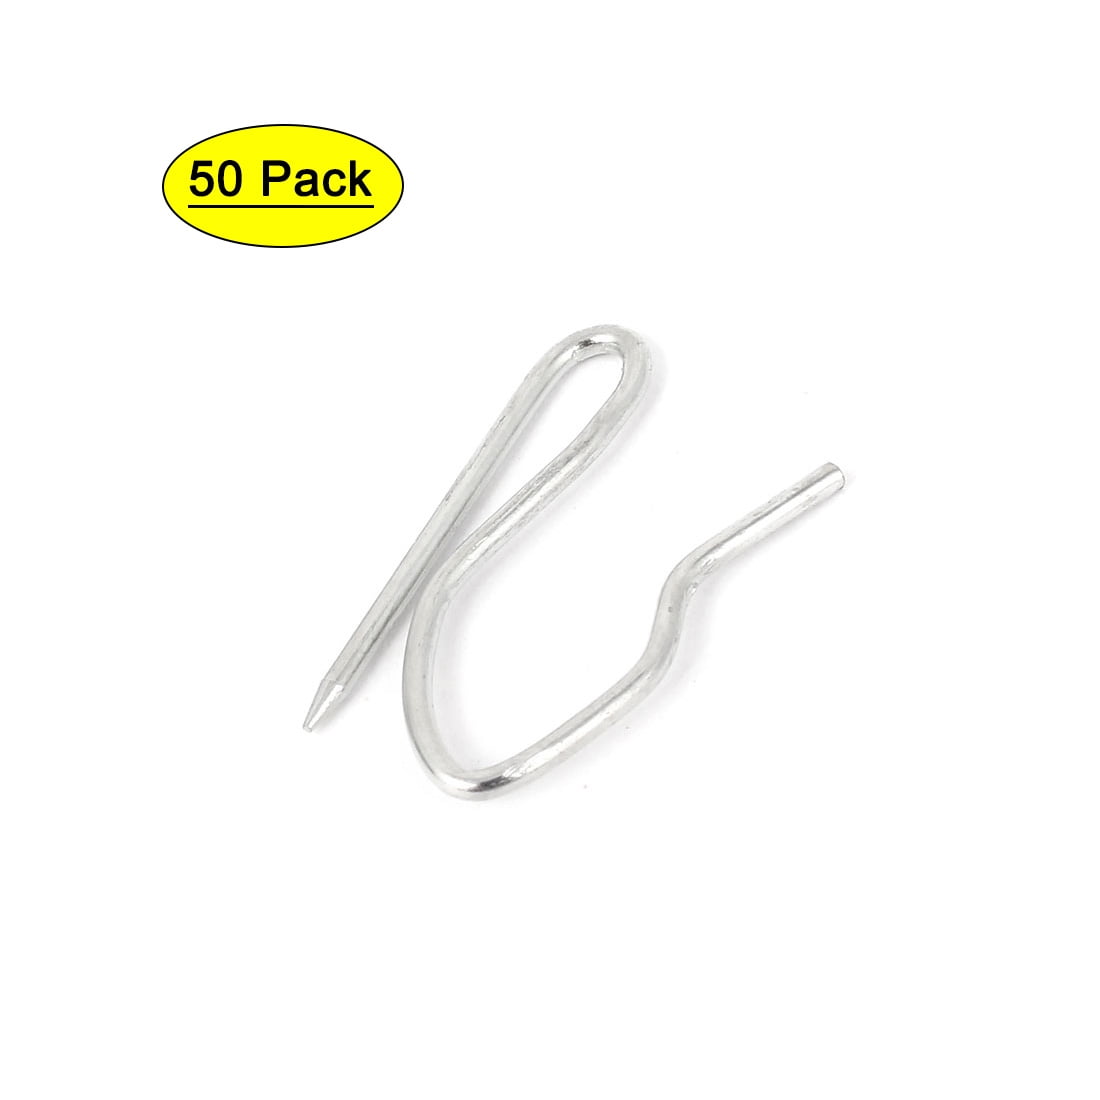 Ideal for Tape Headed Curtains 100 Metal Curtain Hooks 